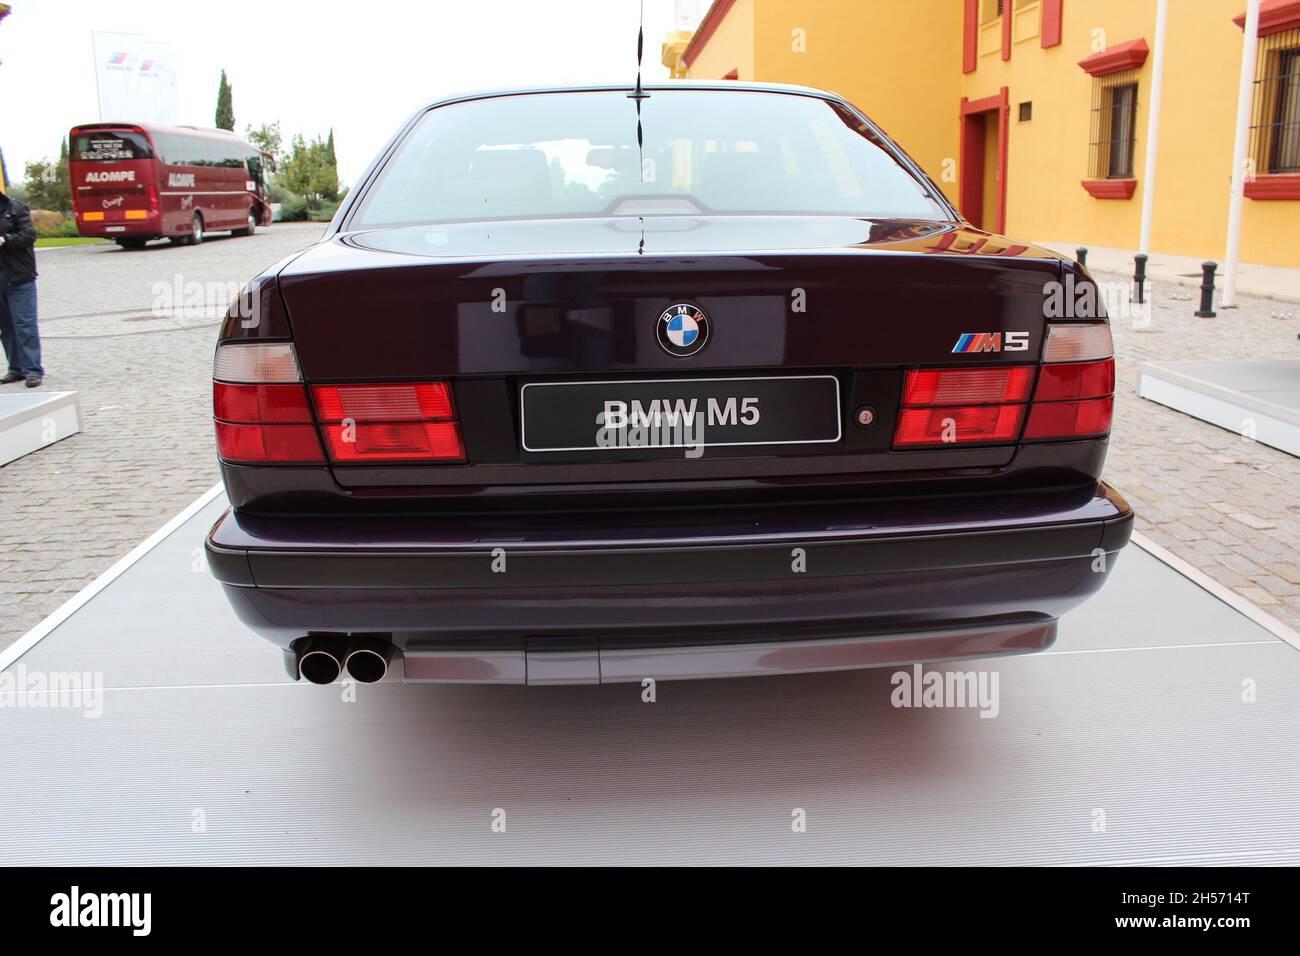 How Good Was the E34 BMW M5 Back in its Day?